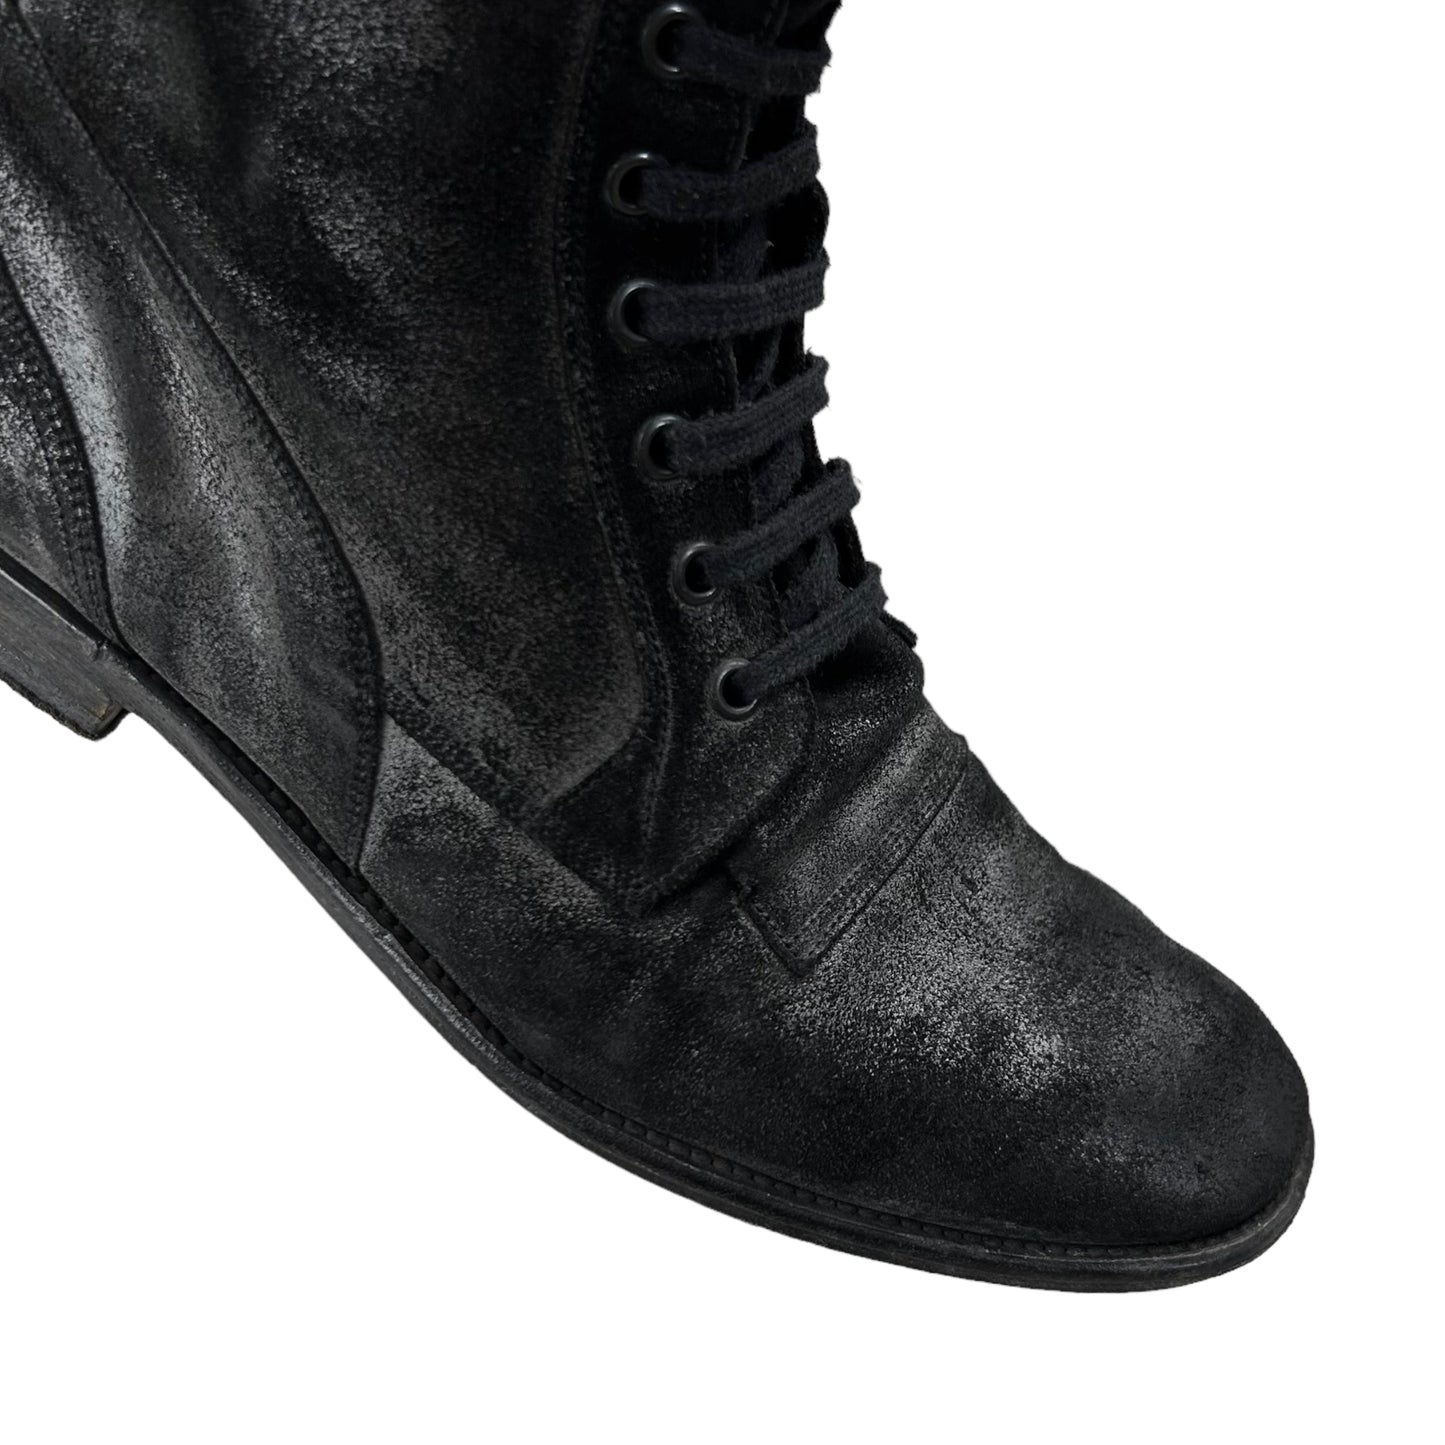 Maison Martin Margiela Distressed Suede Boots